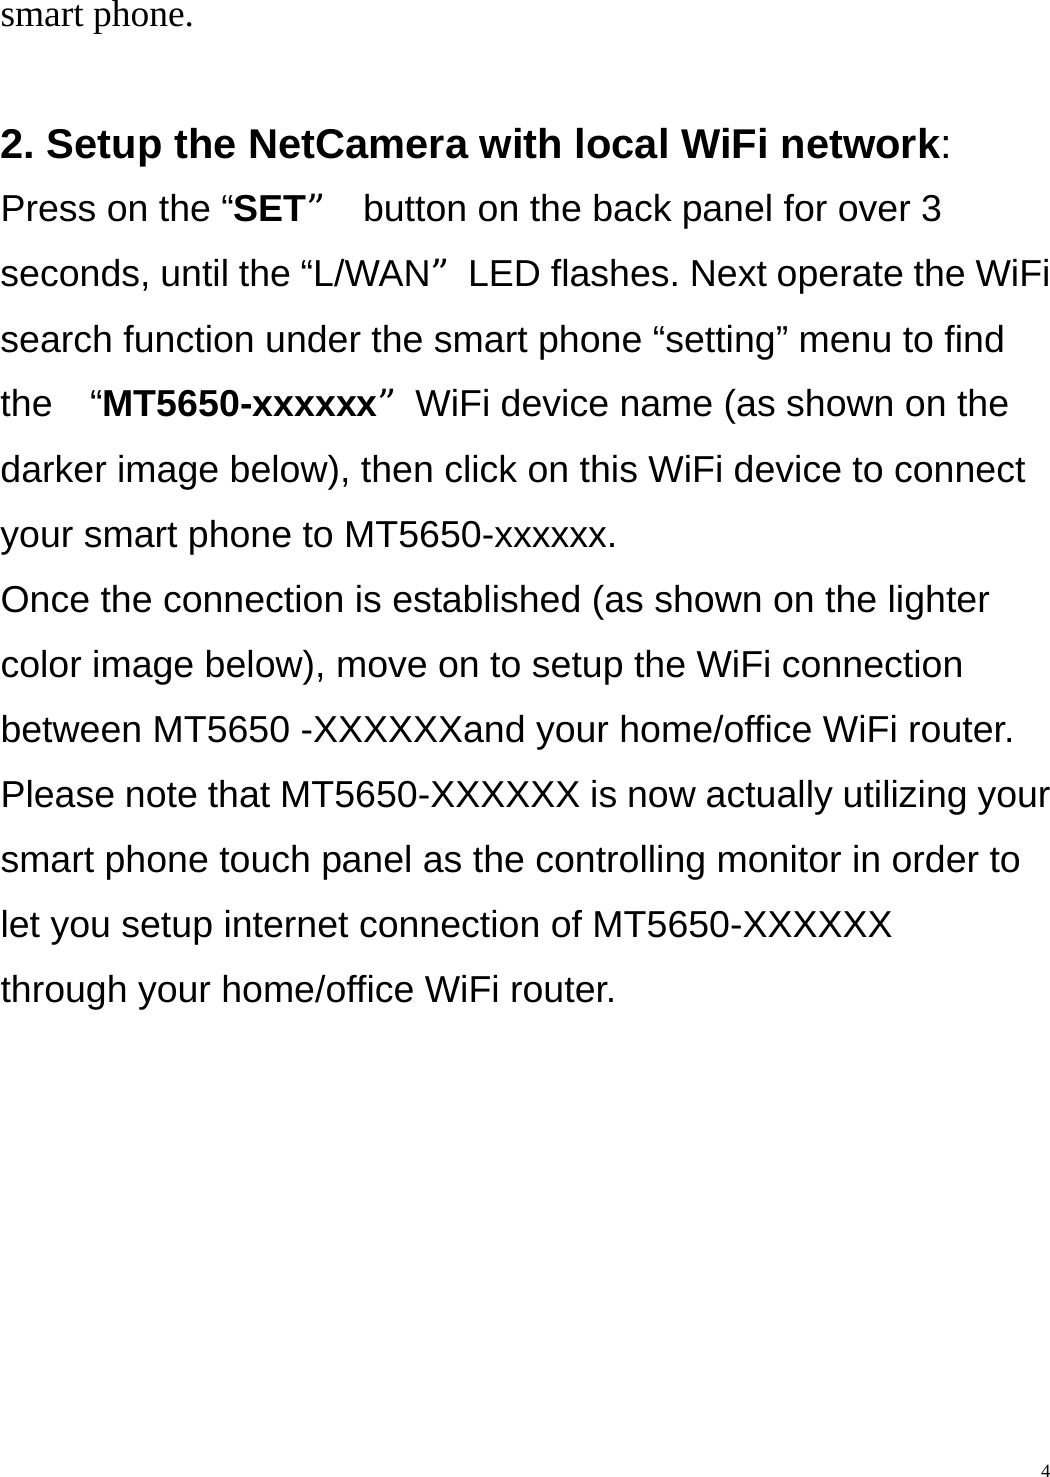    4smart phone.  2. Setup the NetCamera with local WiFi network:  Press on the “SET”  button on the back panel for over 3 seconds, until the “L/WAN”LED flashes. Next operate the WiFi search function under the smart phone “setting” menu to find the  “MT5650-xxxxxx”WiFi device name (as shown on the darker image below), then click on this WiFi device to connect your smart phone to MT5650-xxxxxx.   Once the connection is established (as shown on the lighter color image below), move on to setup the WiFi connection between MT5650 -XXXXXXand your home/office WiFi router.   Please note that MT5650-XXXXXX is now actually utilizing your smart phone touch panel as the controlling monitor in order to let you setup internet connection of MT5650-XXXXXX   through your home/office WiFi router. 